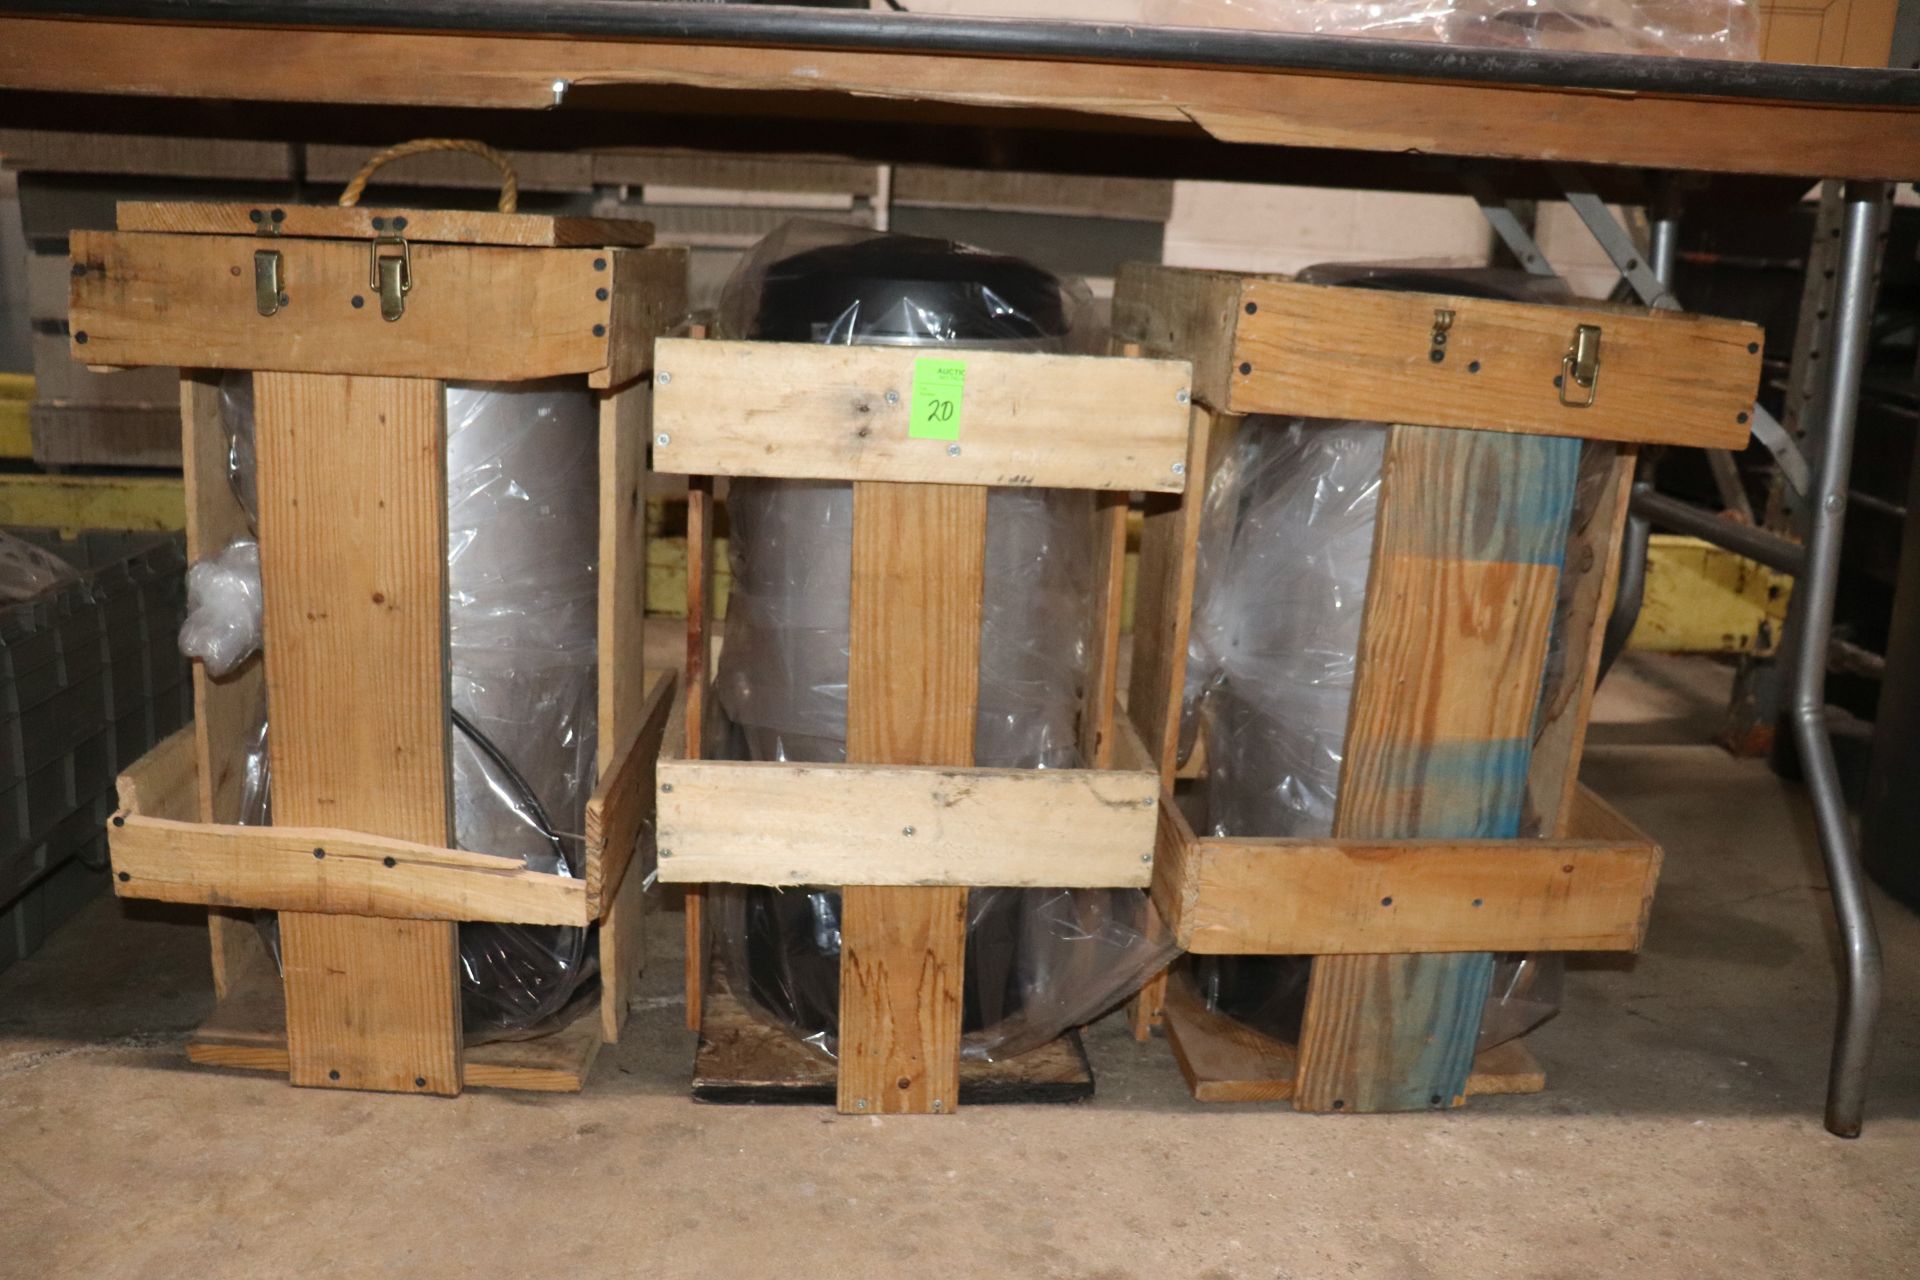 Three coffee brewers in wood crates